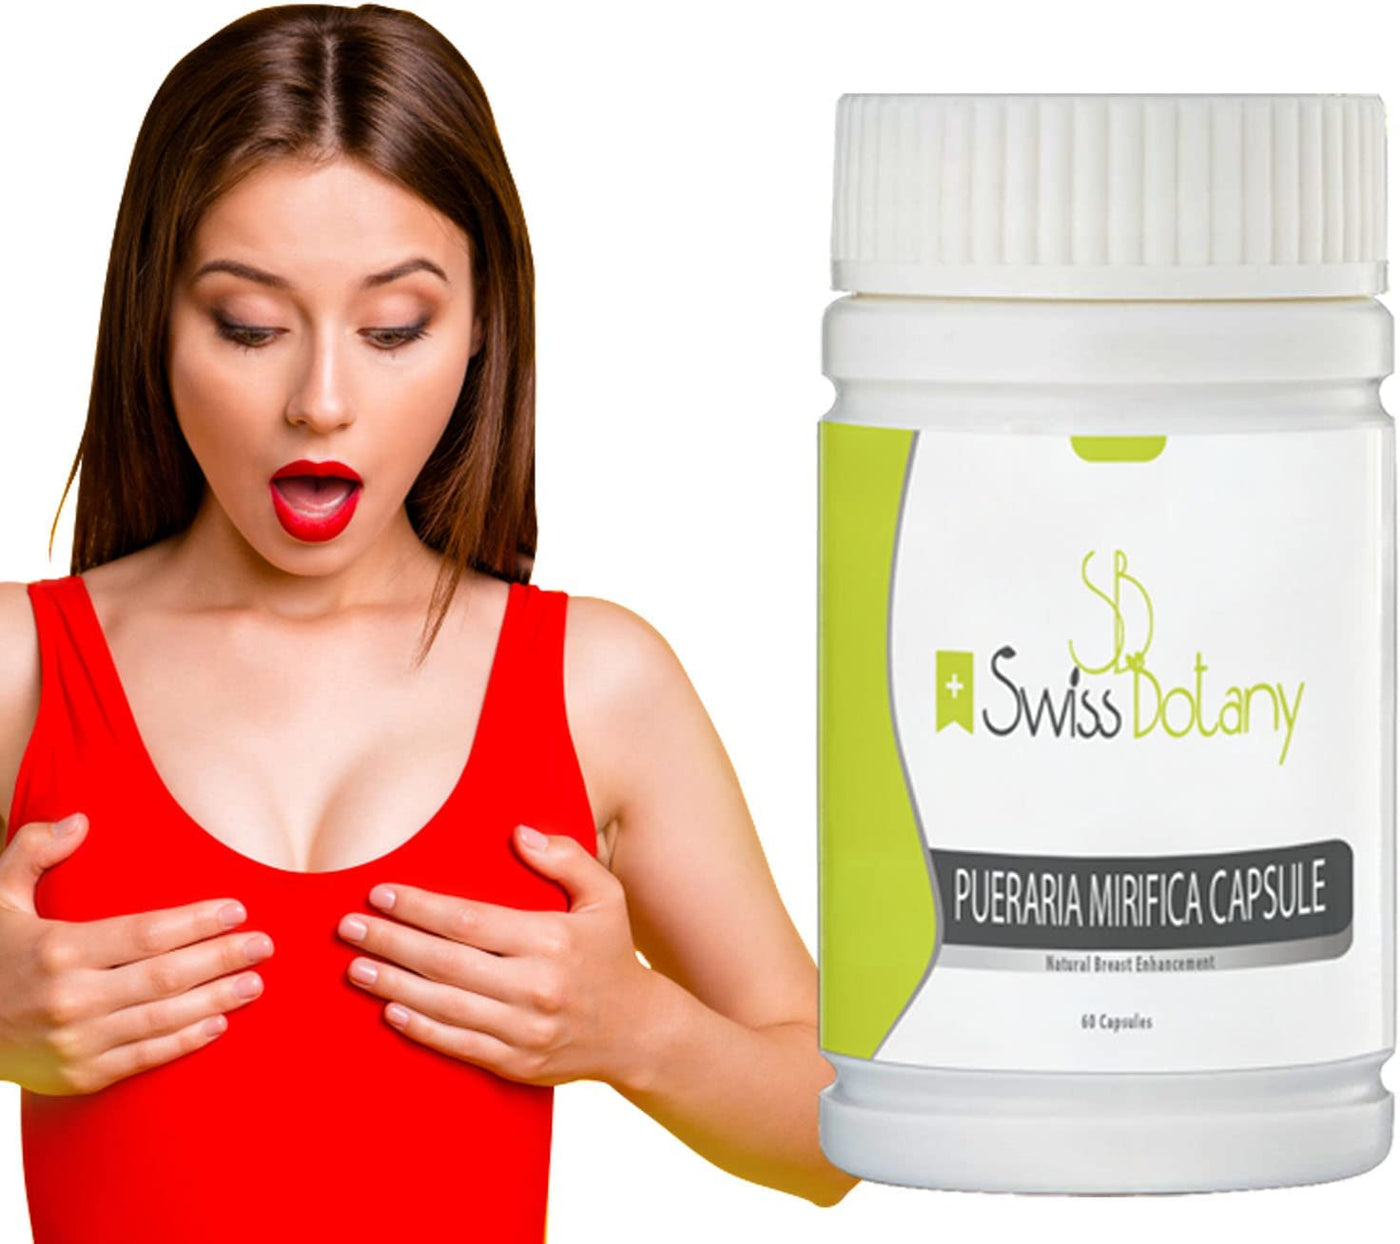 Swiss Botany Health and Beauty Swiss Botany Breast Enlargement Pueraria Mirifica Capsules for Natural Bust Enhancement, Restore Elasticity and Smoothness, Improve Skin, Hair and Nails, Take with Food, 120 Capsules, 2 Bottles